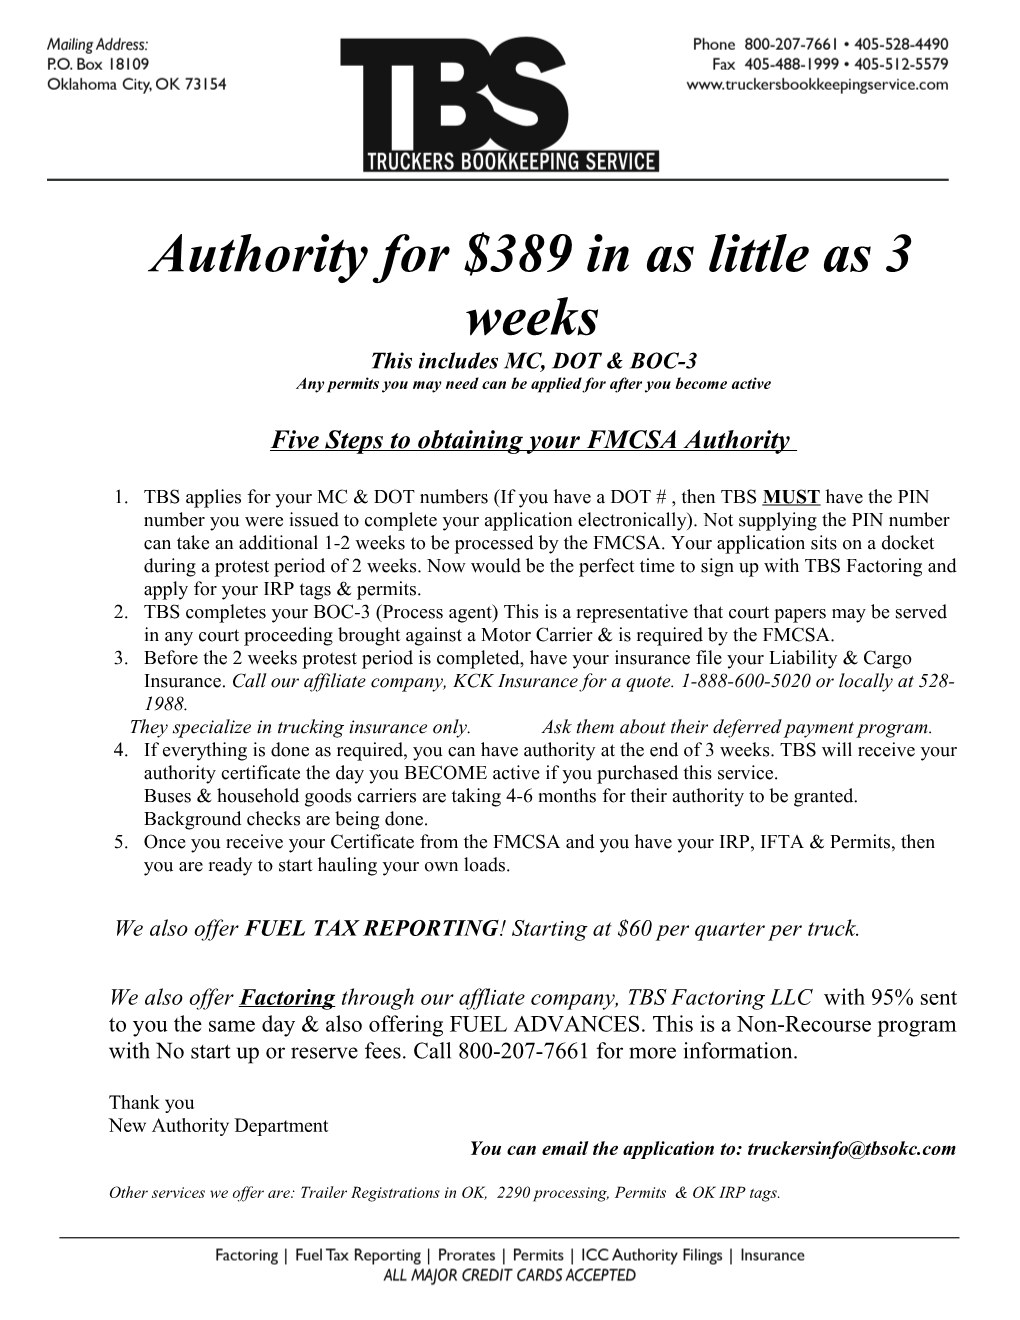 Authority for $389 in As Little As 3 Weeks